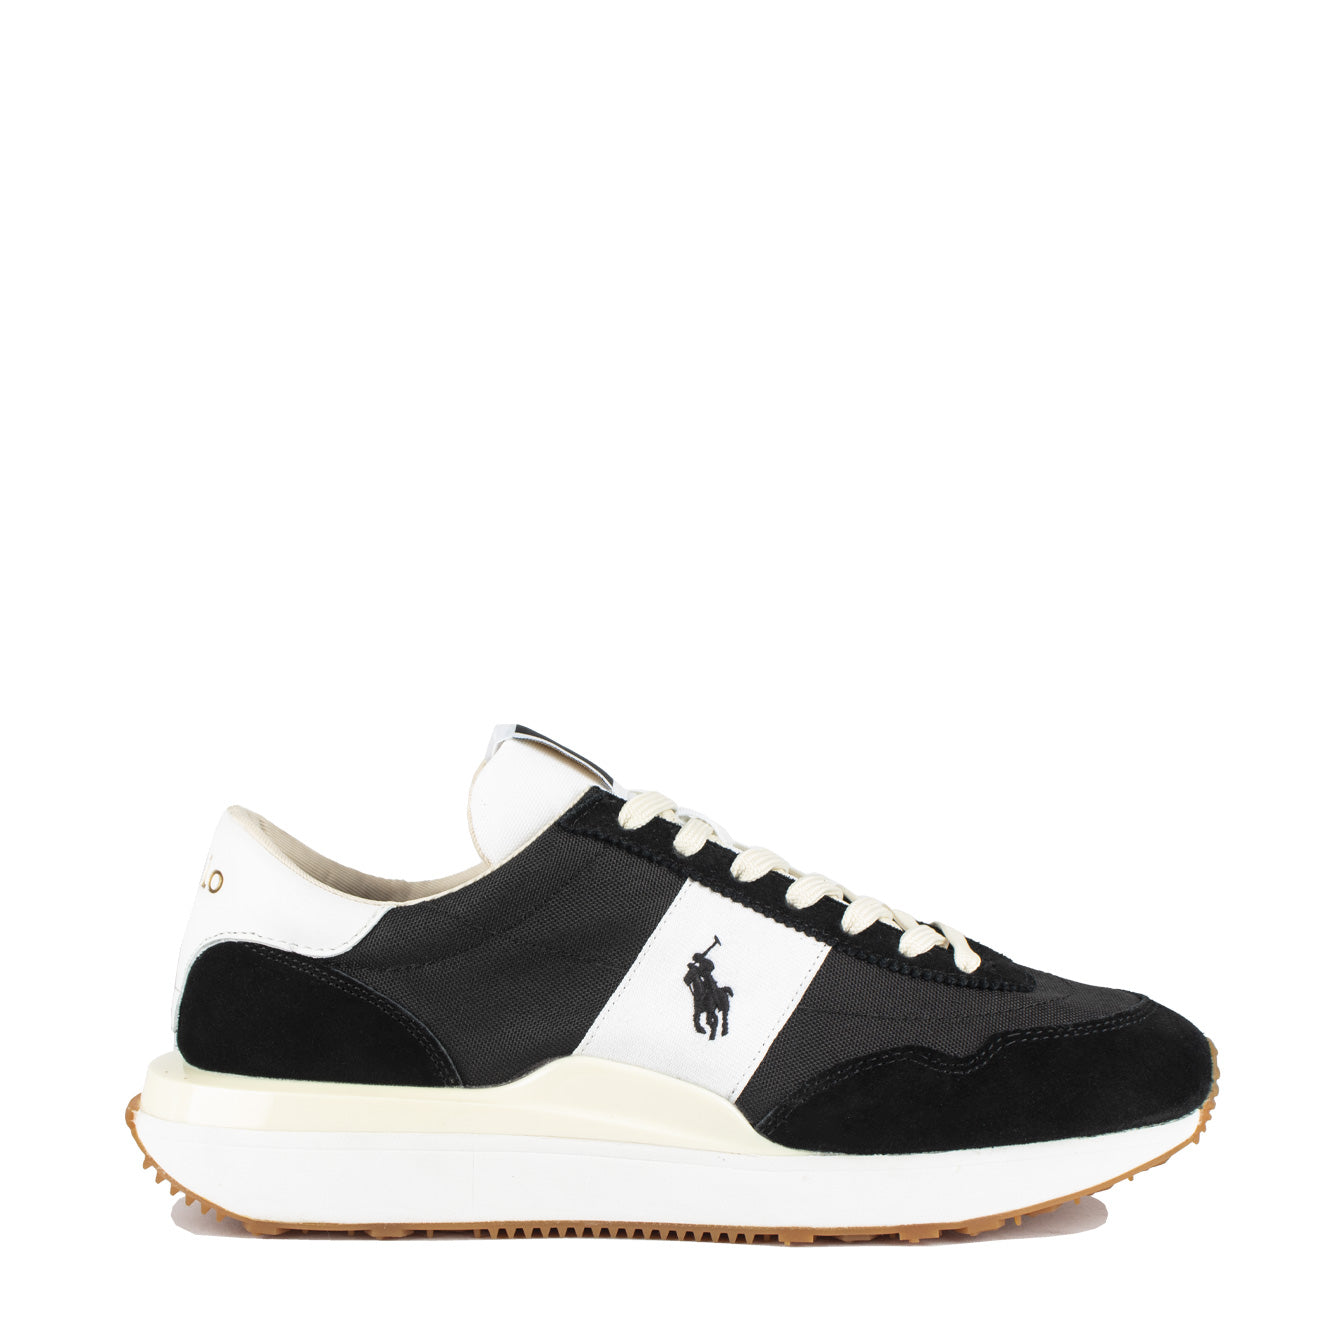 Polo Ralph Lauren Train 89 Suede and Oxford Trainer Black / White | The ...